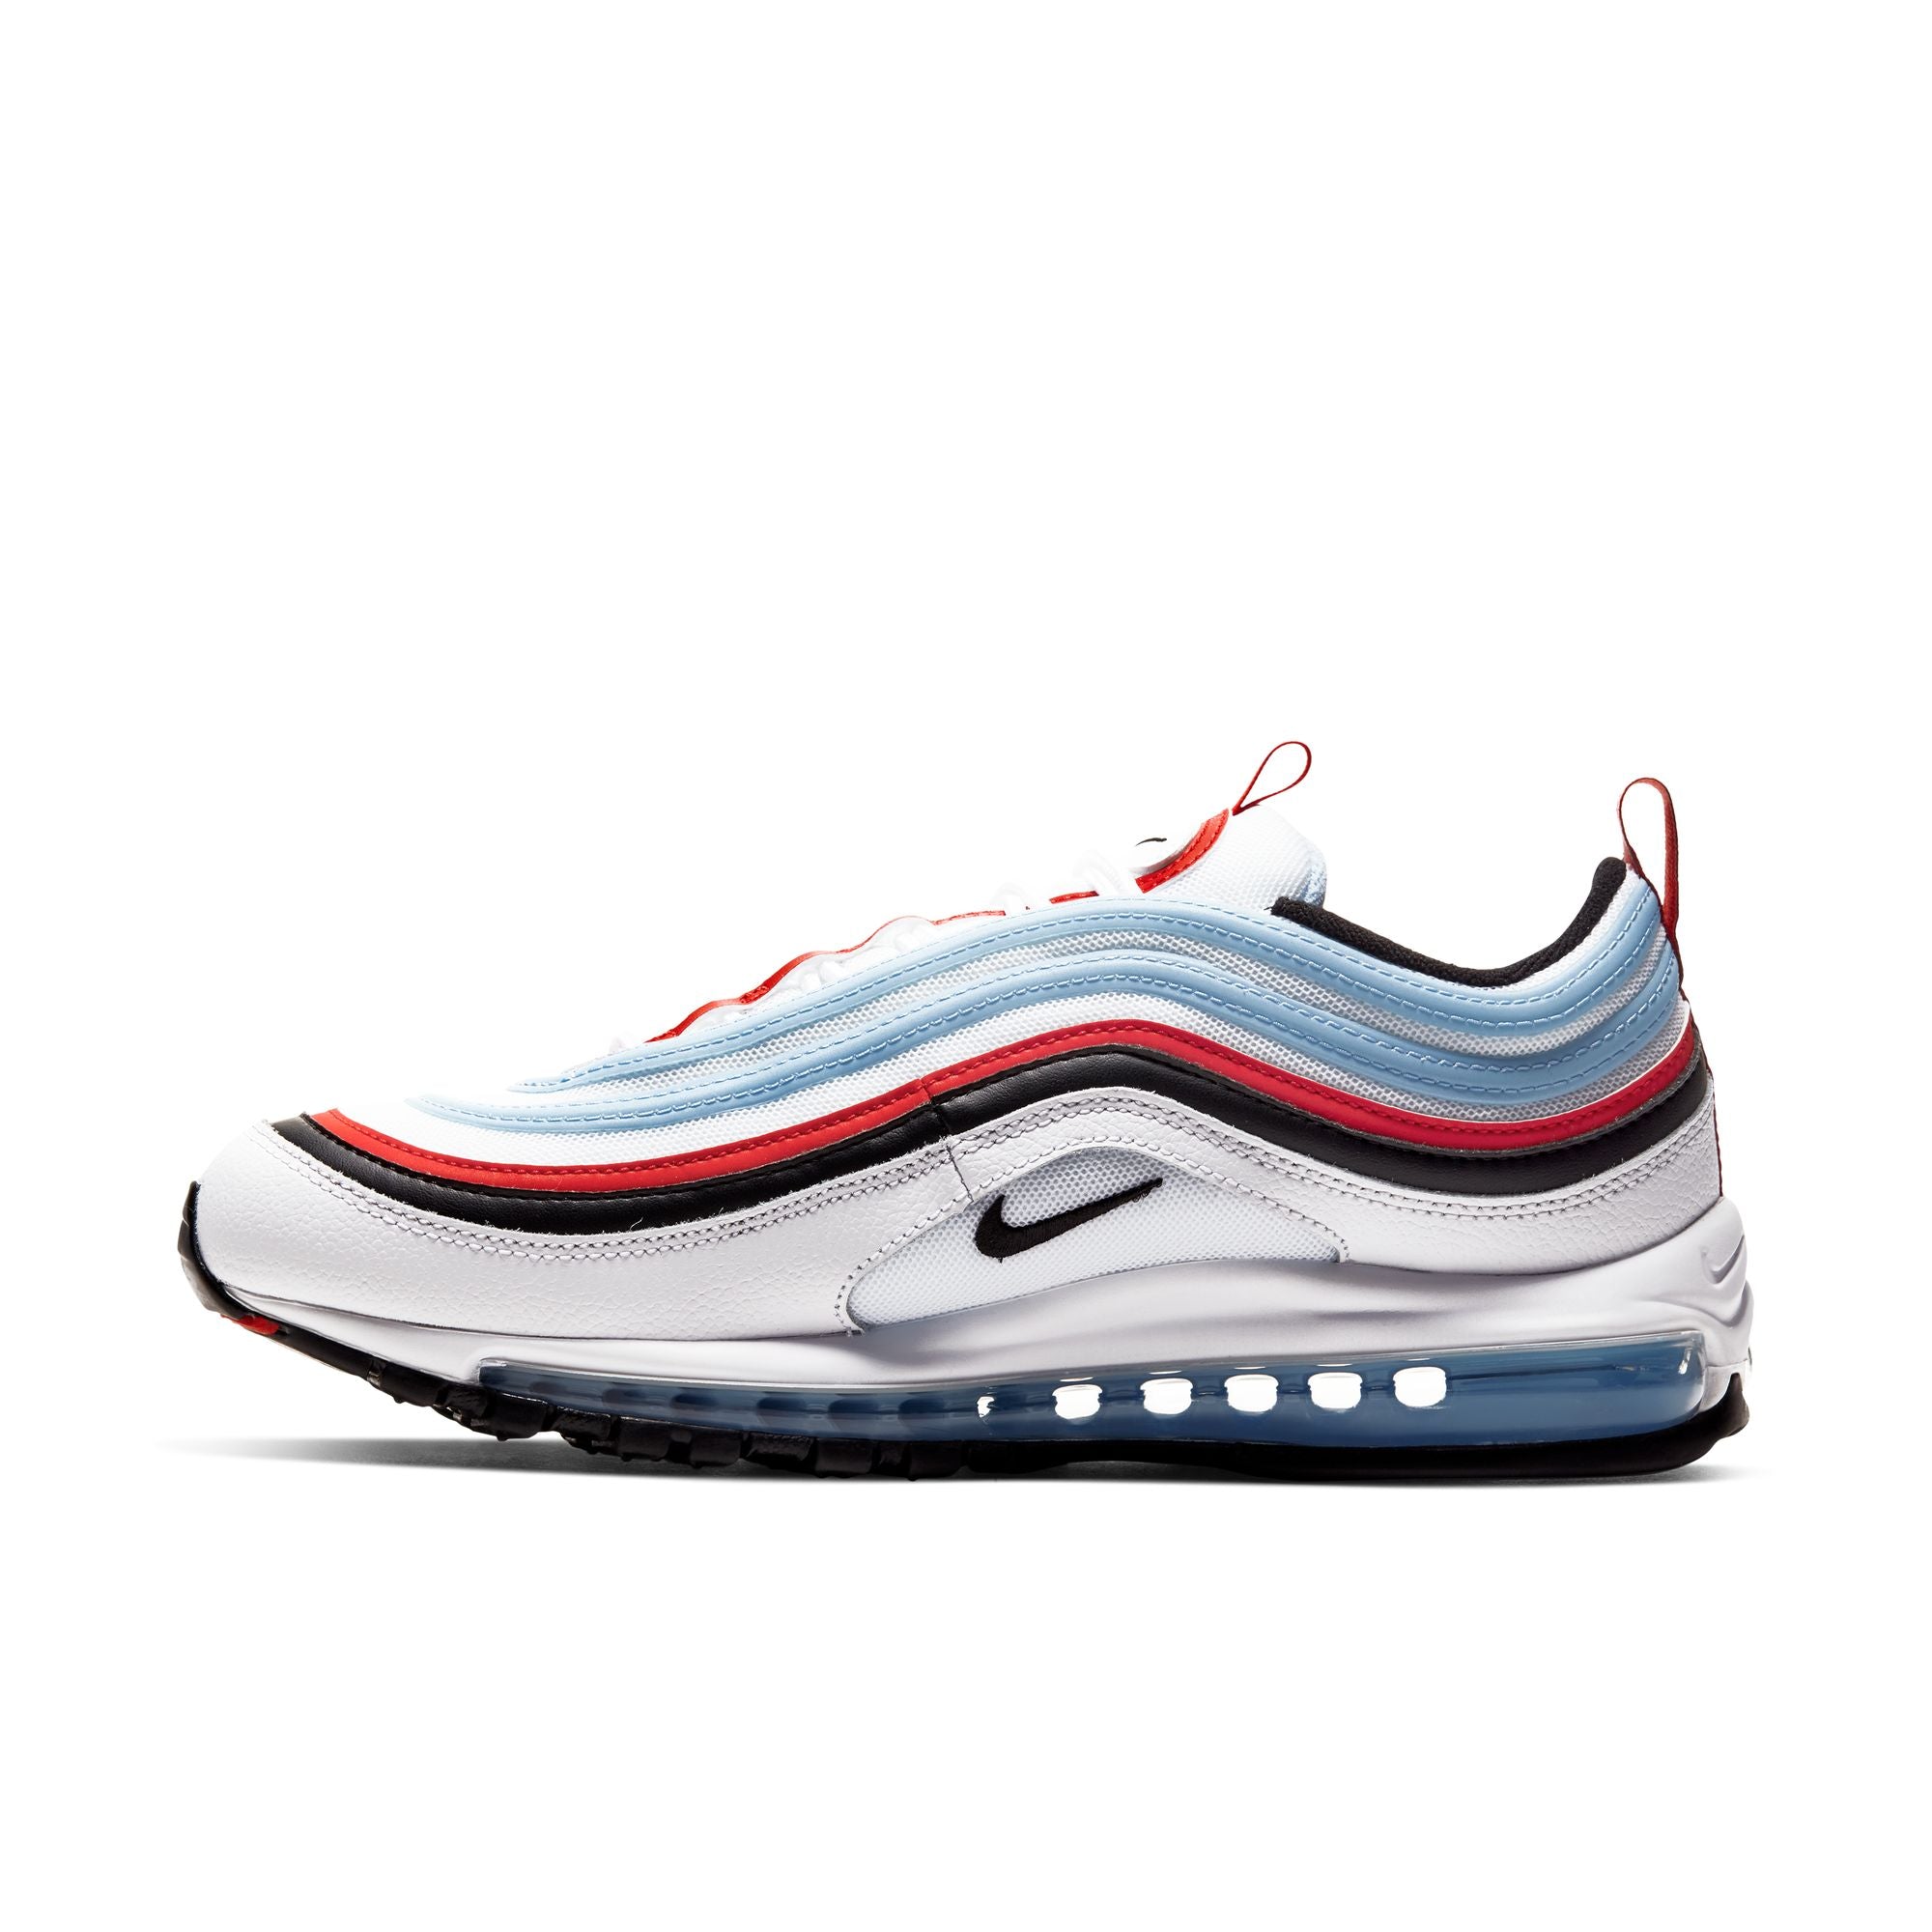 Nike Air Max 97 (Chicago) Men's Shoes